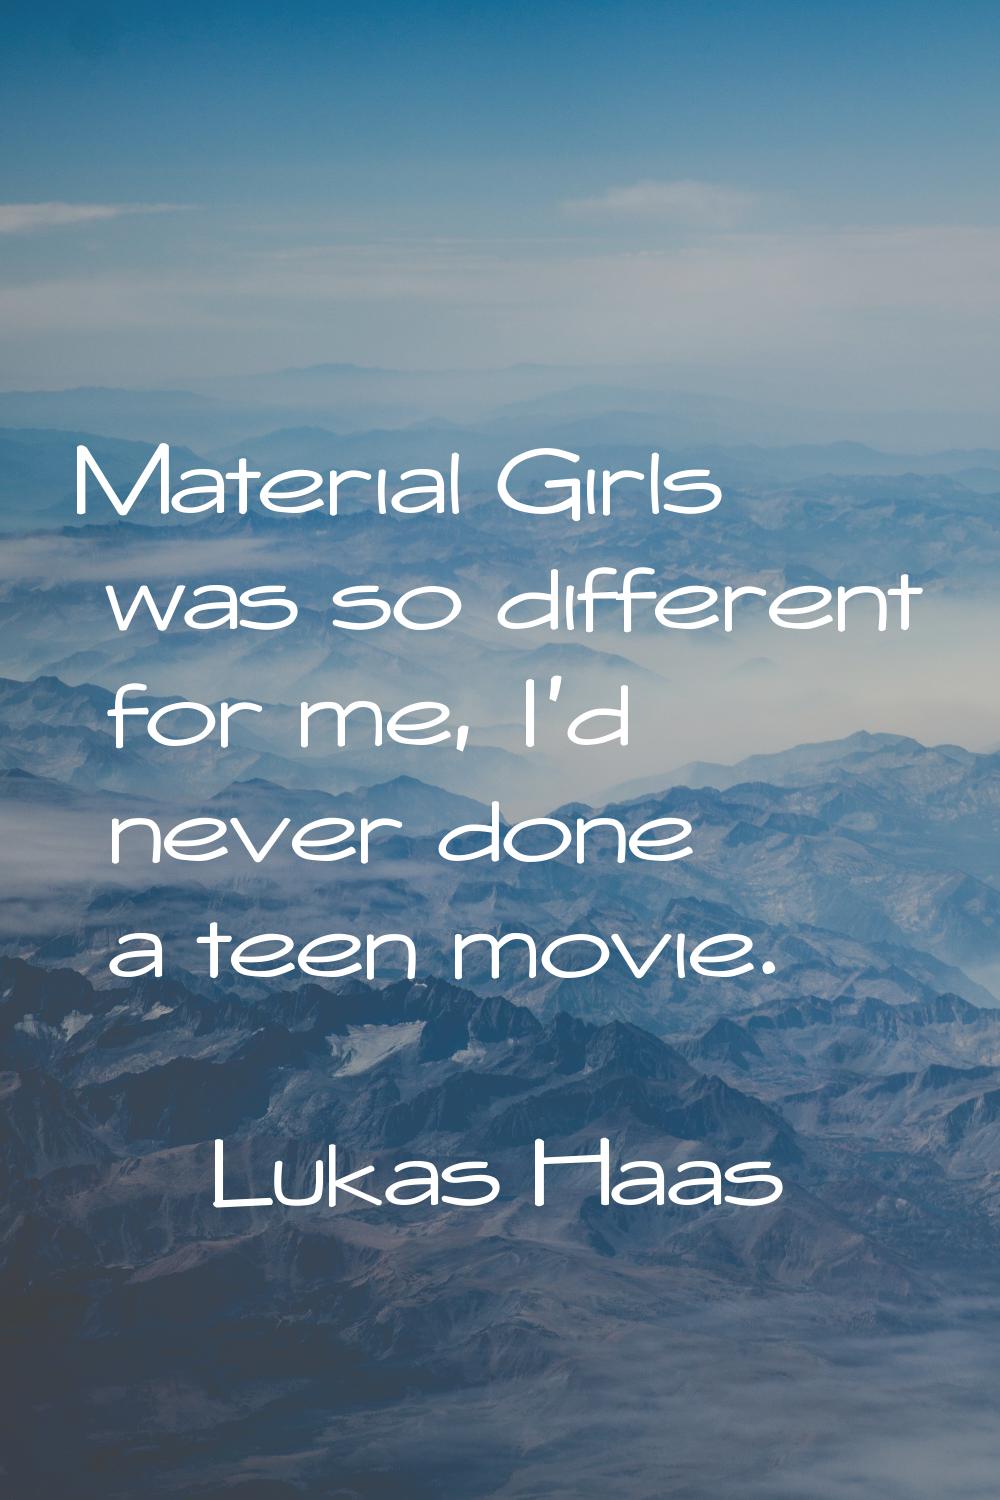 Material Girls was so different for me, I'd never done a teen movie.